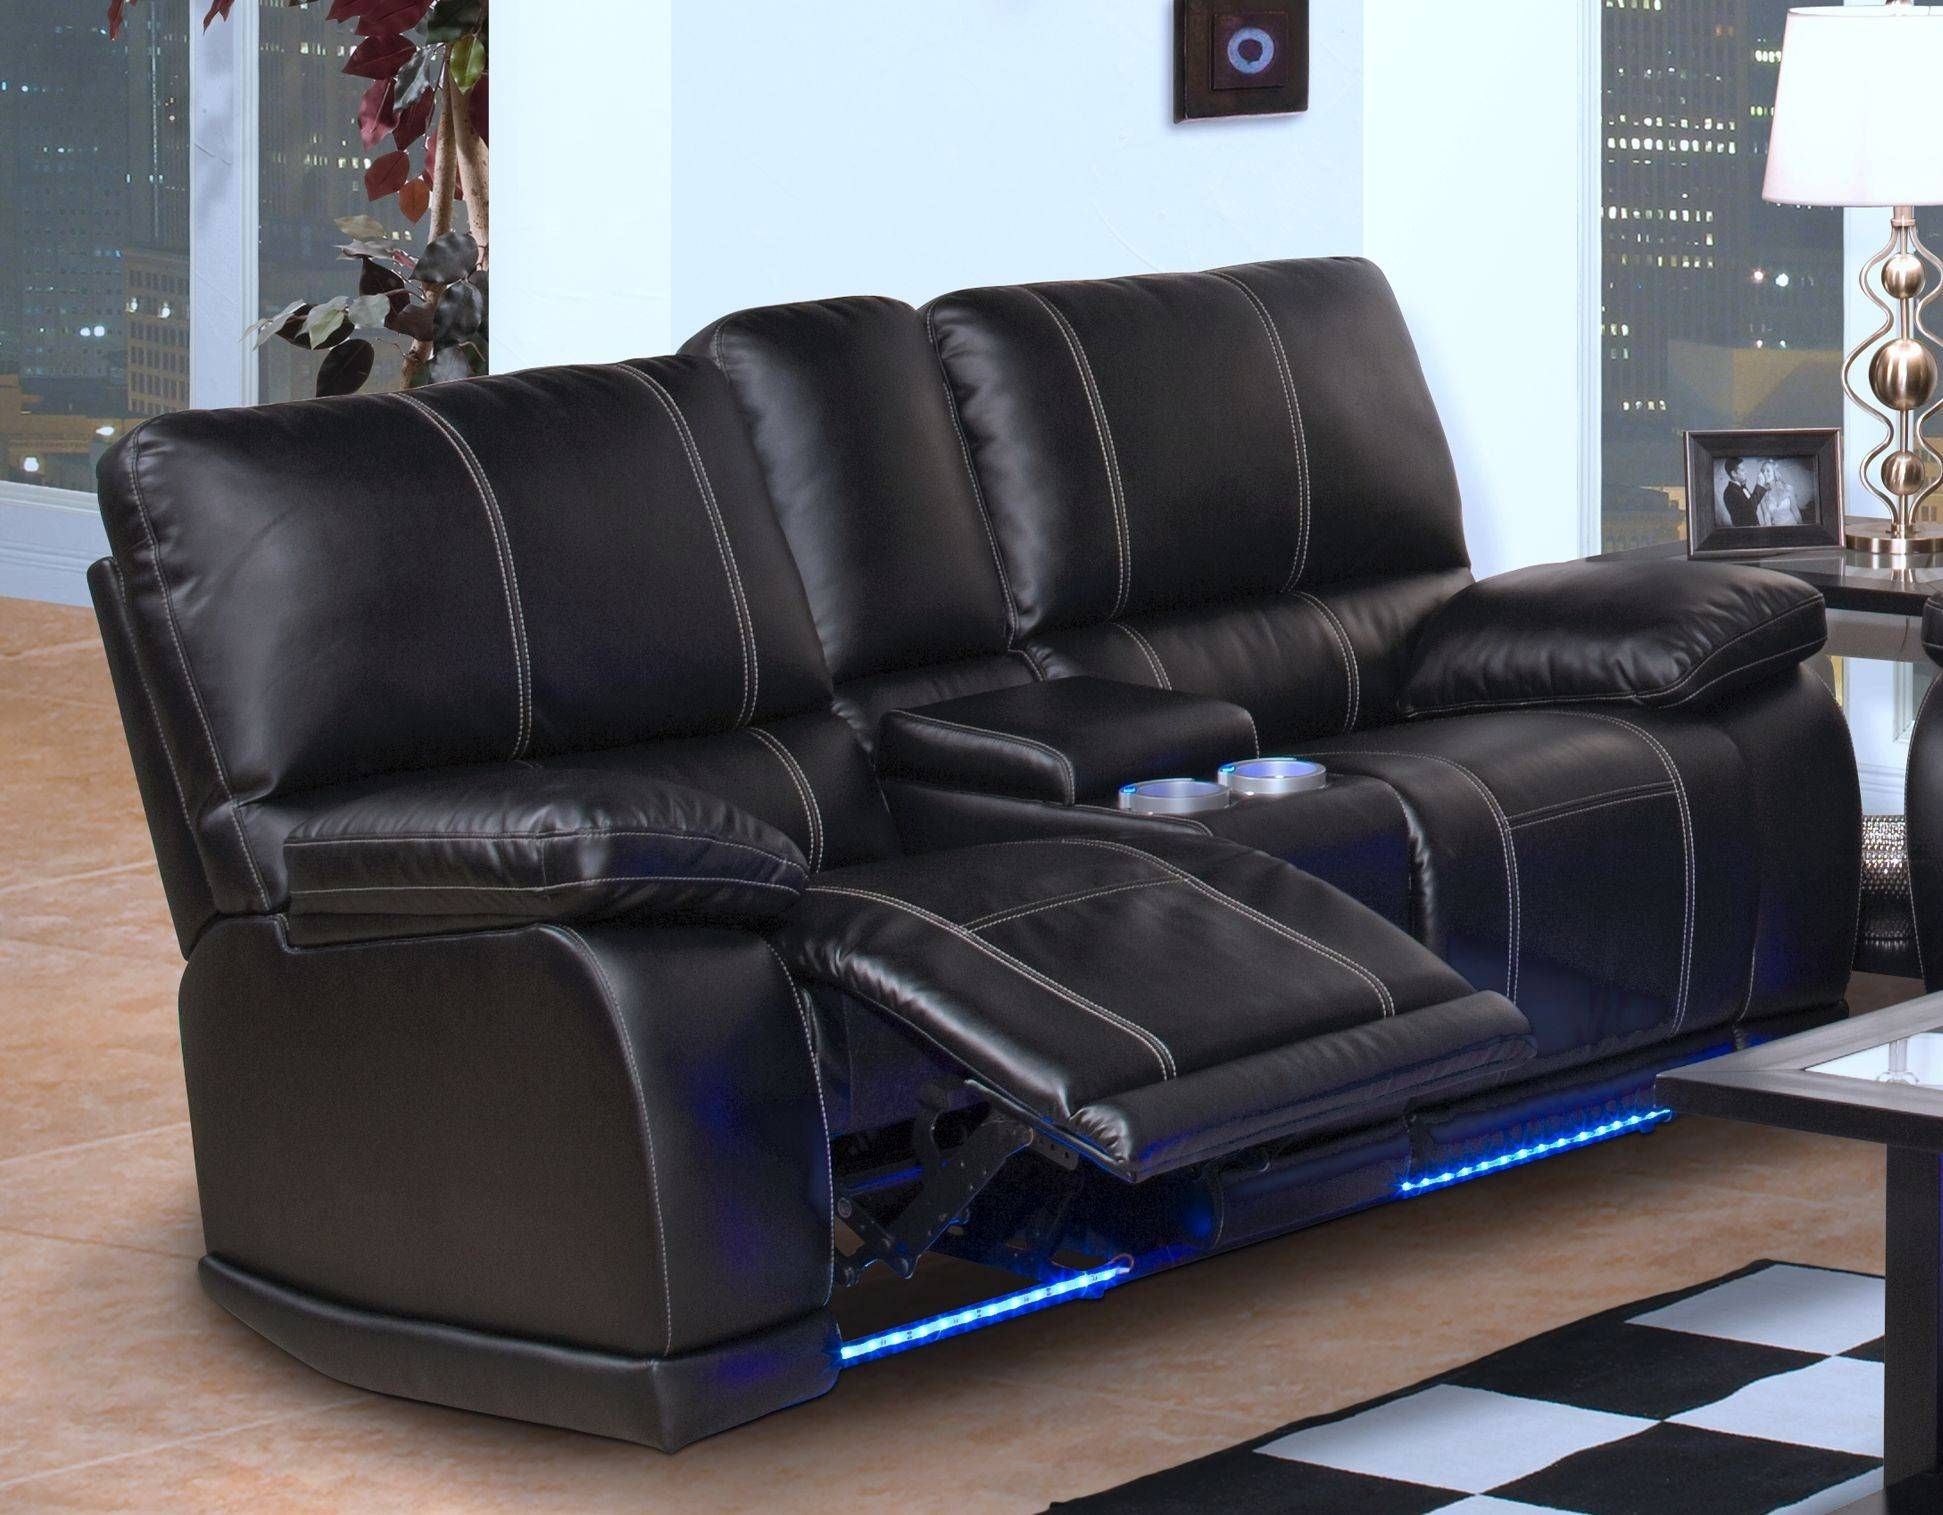 Dylan Power Reclining Sofa Black | Big's Furniture Store Las Vegas With Regard To Recliner Sofa Chairs (View 17 of 30)